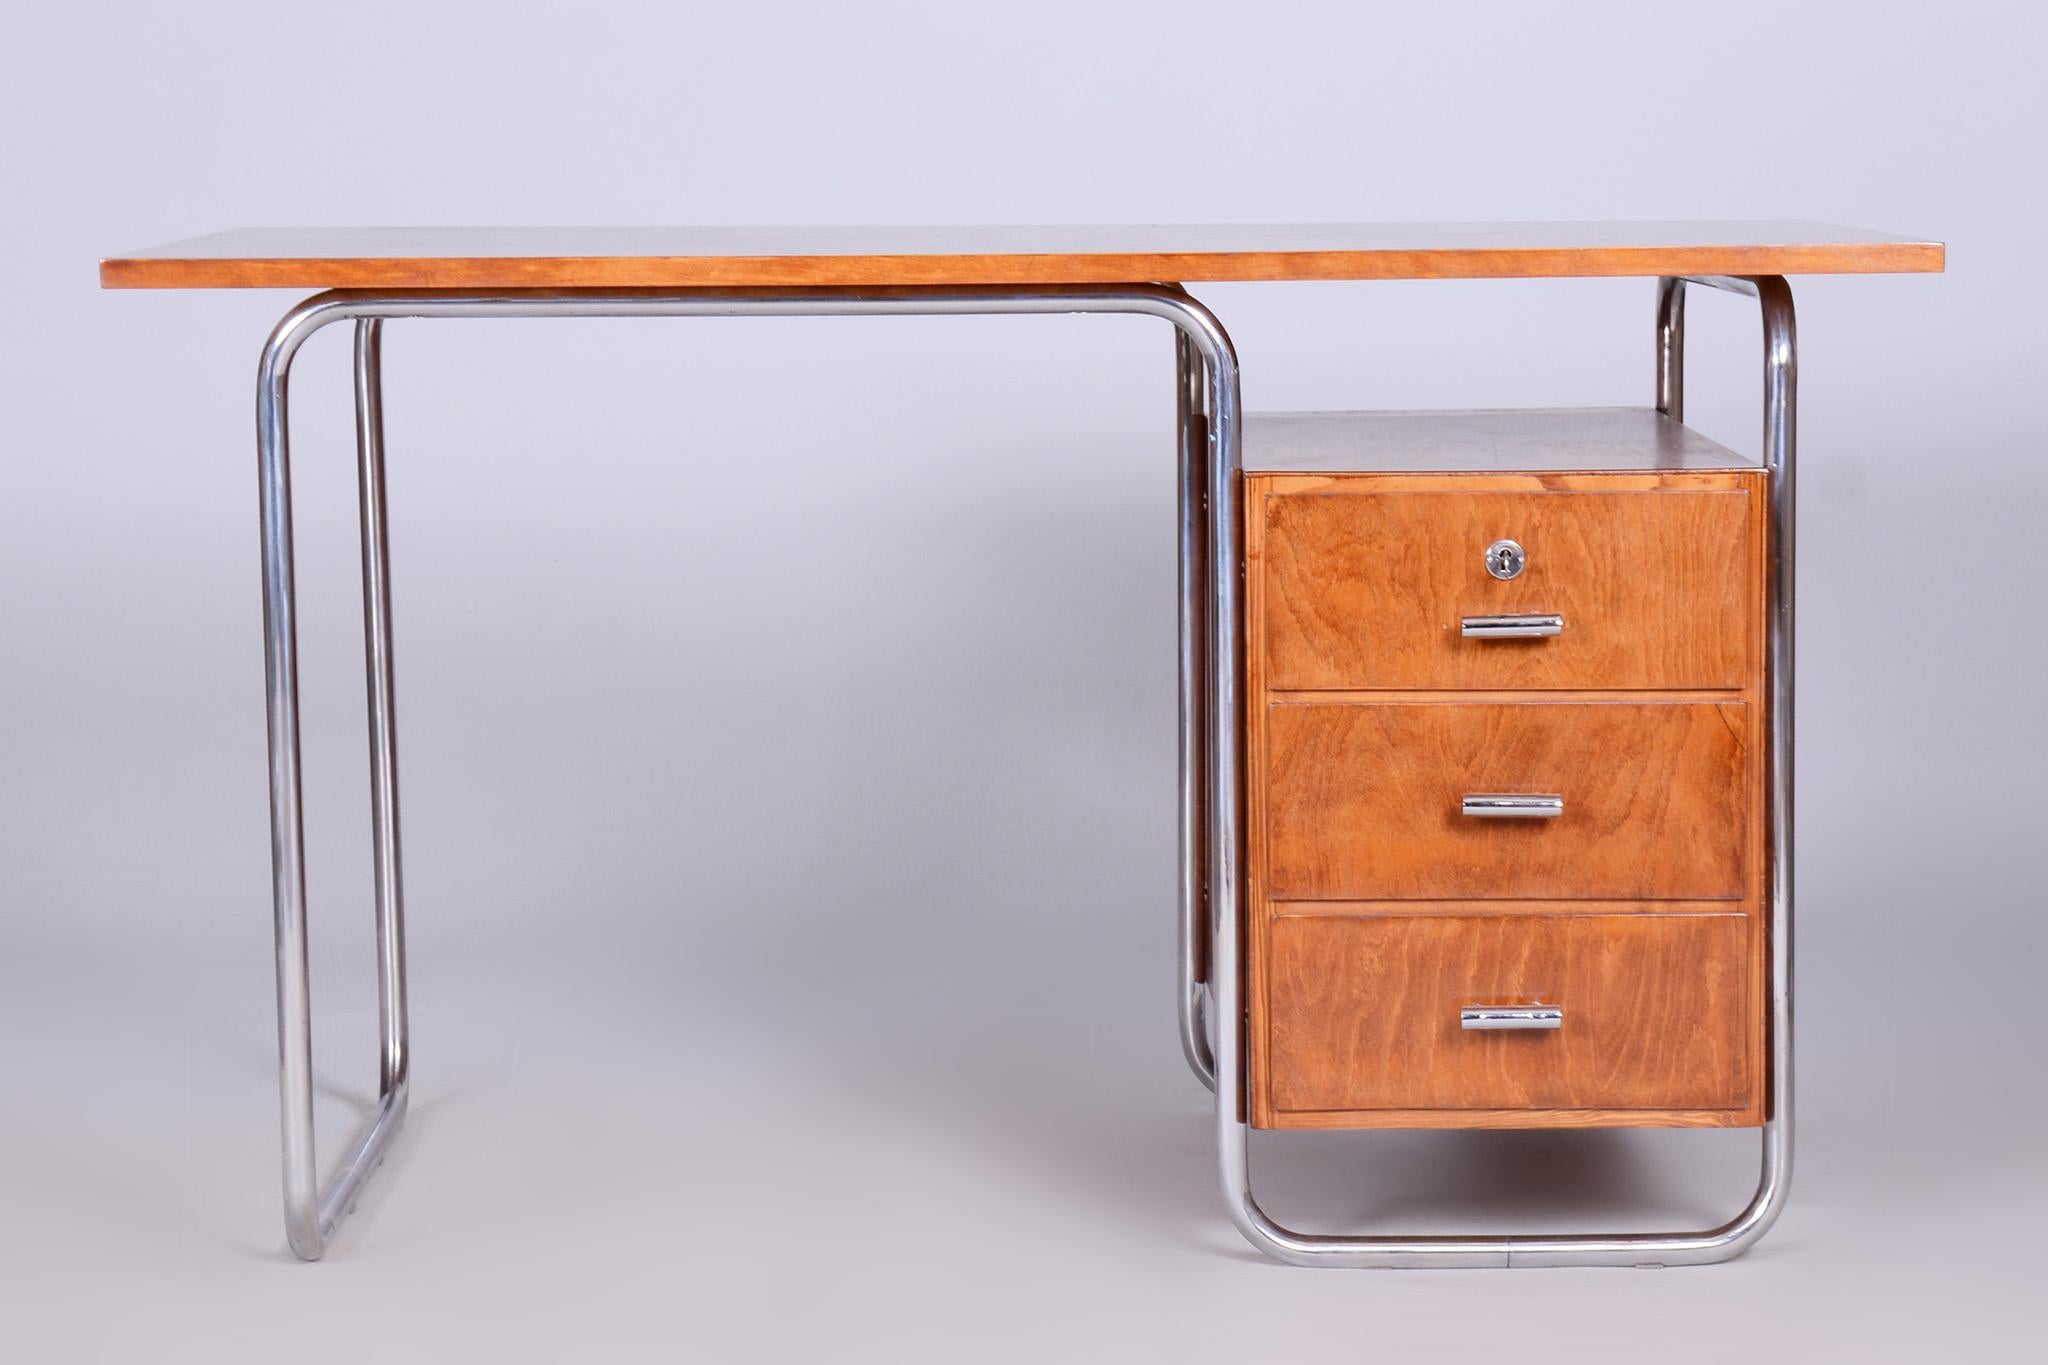 Restored writing desk with a frame in tubular chromed steel.

Designed by Robert Slezak in the 1930s.
Material: Beech, chrome-plated steel.
Number of drawers: 3.

Wood is completely restored. 
Tubular steel with original chrome plating and